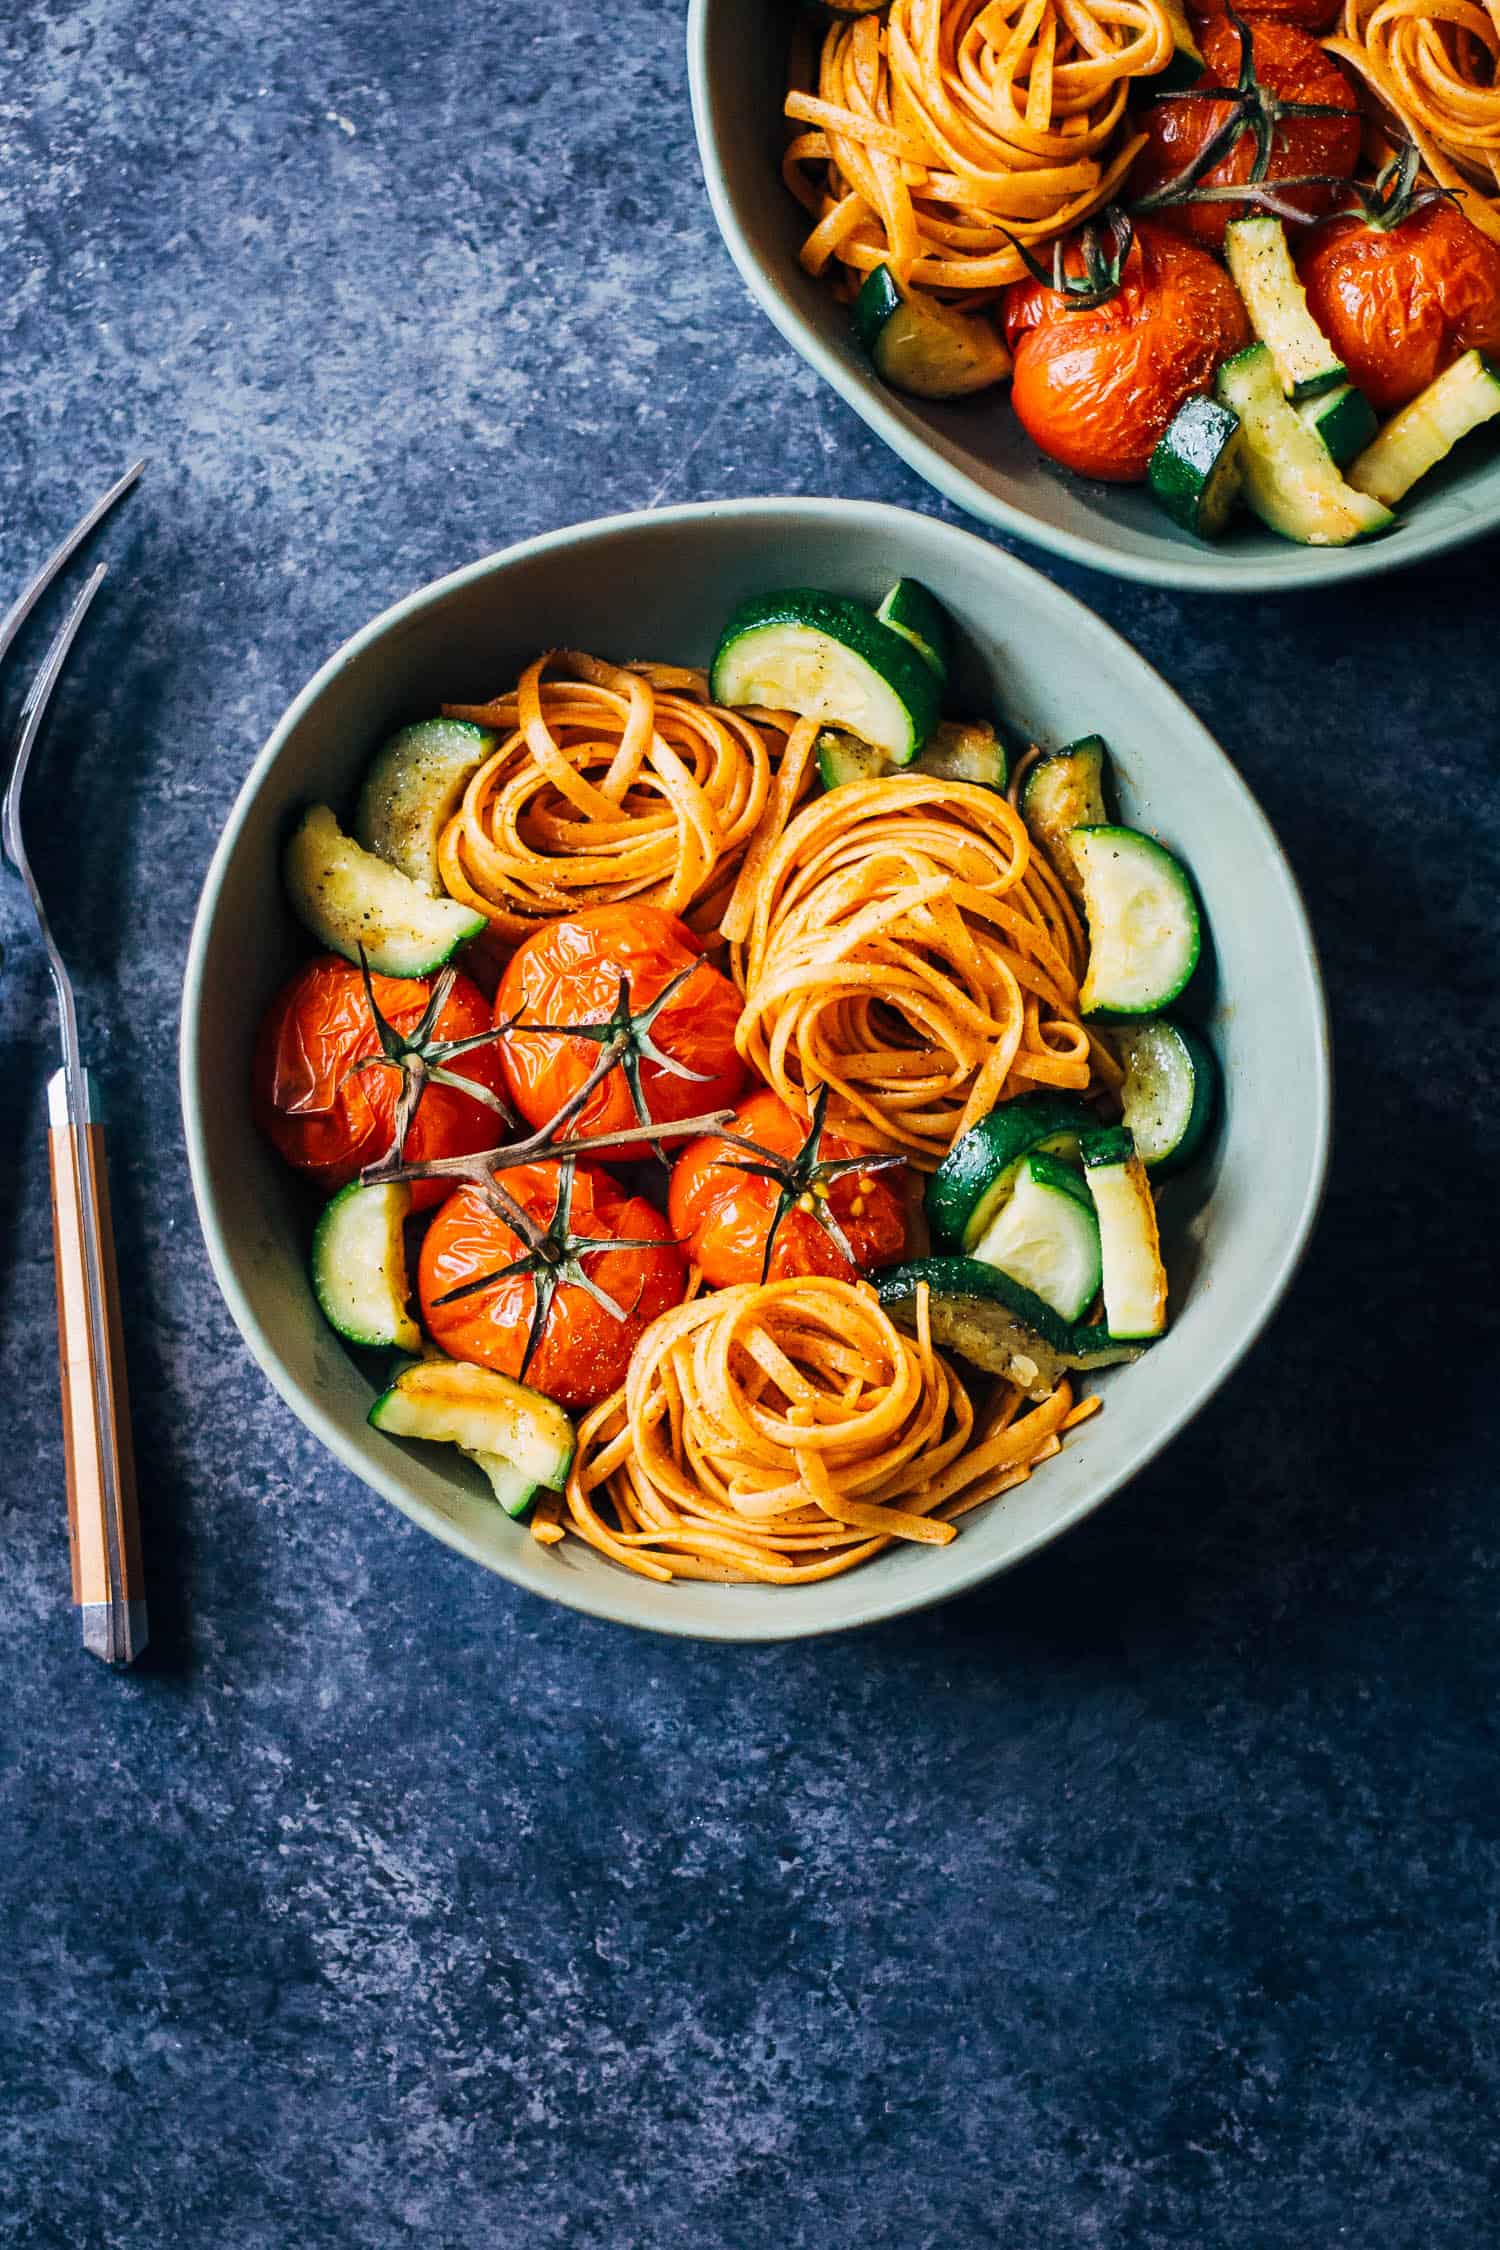 Blistered Tomato Fettuccine in Smoky Sauce from Simply Vibrant cookbook